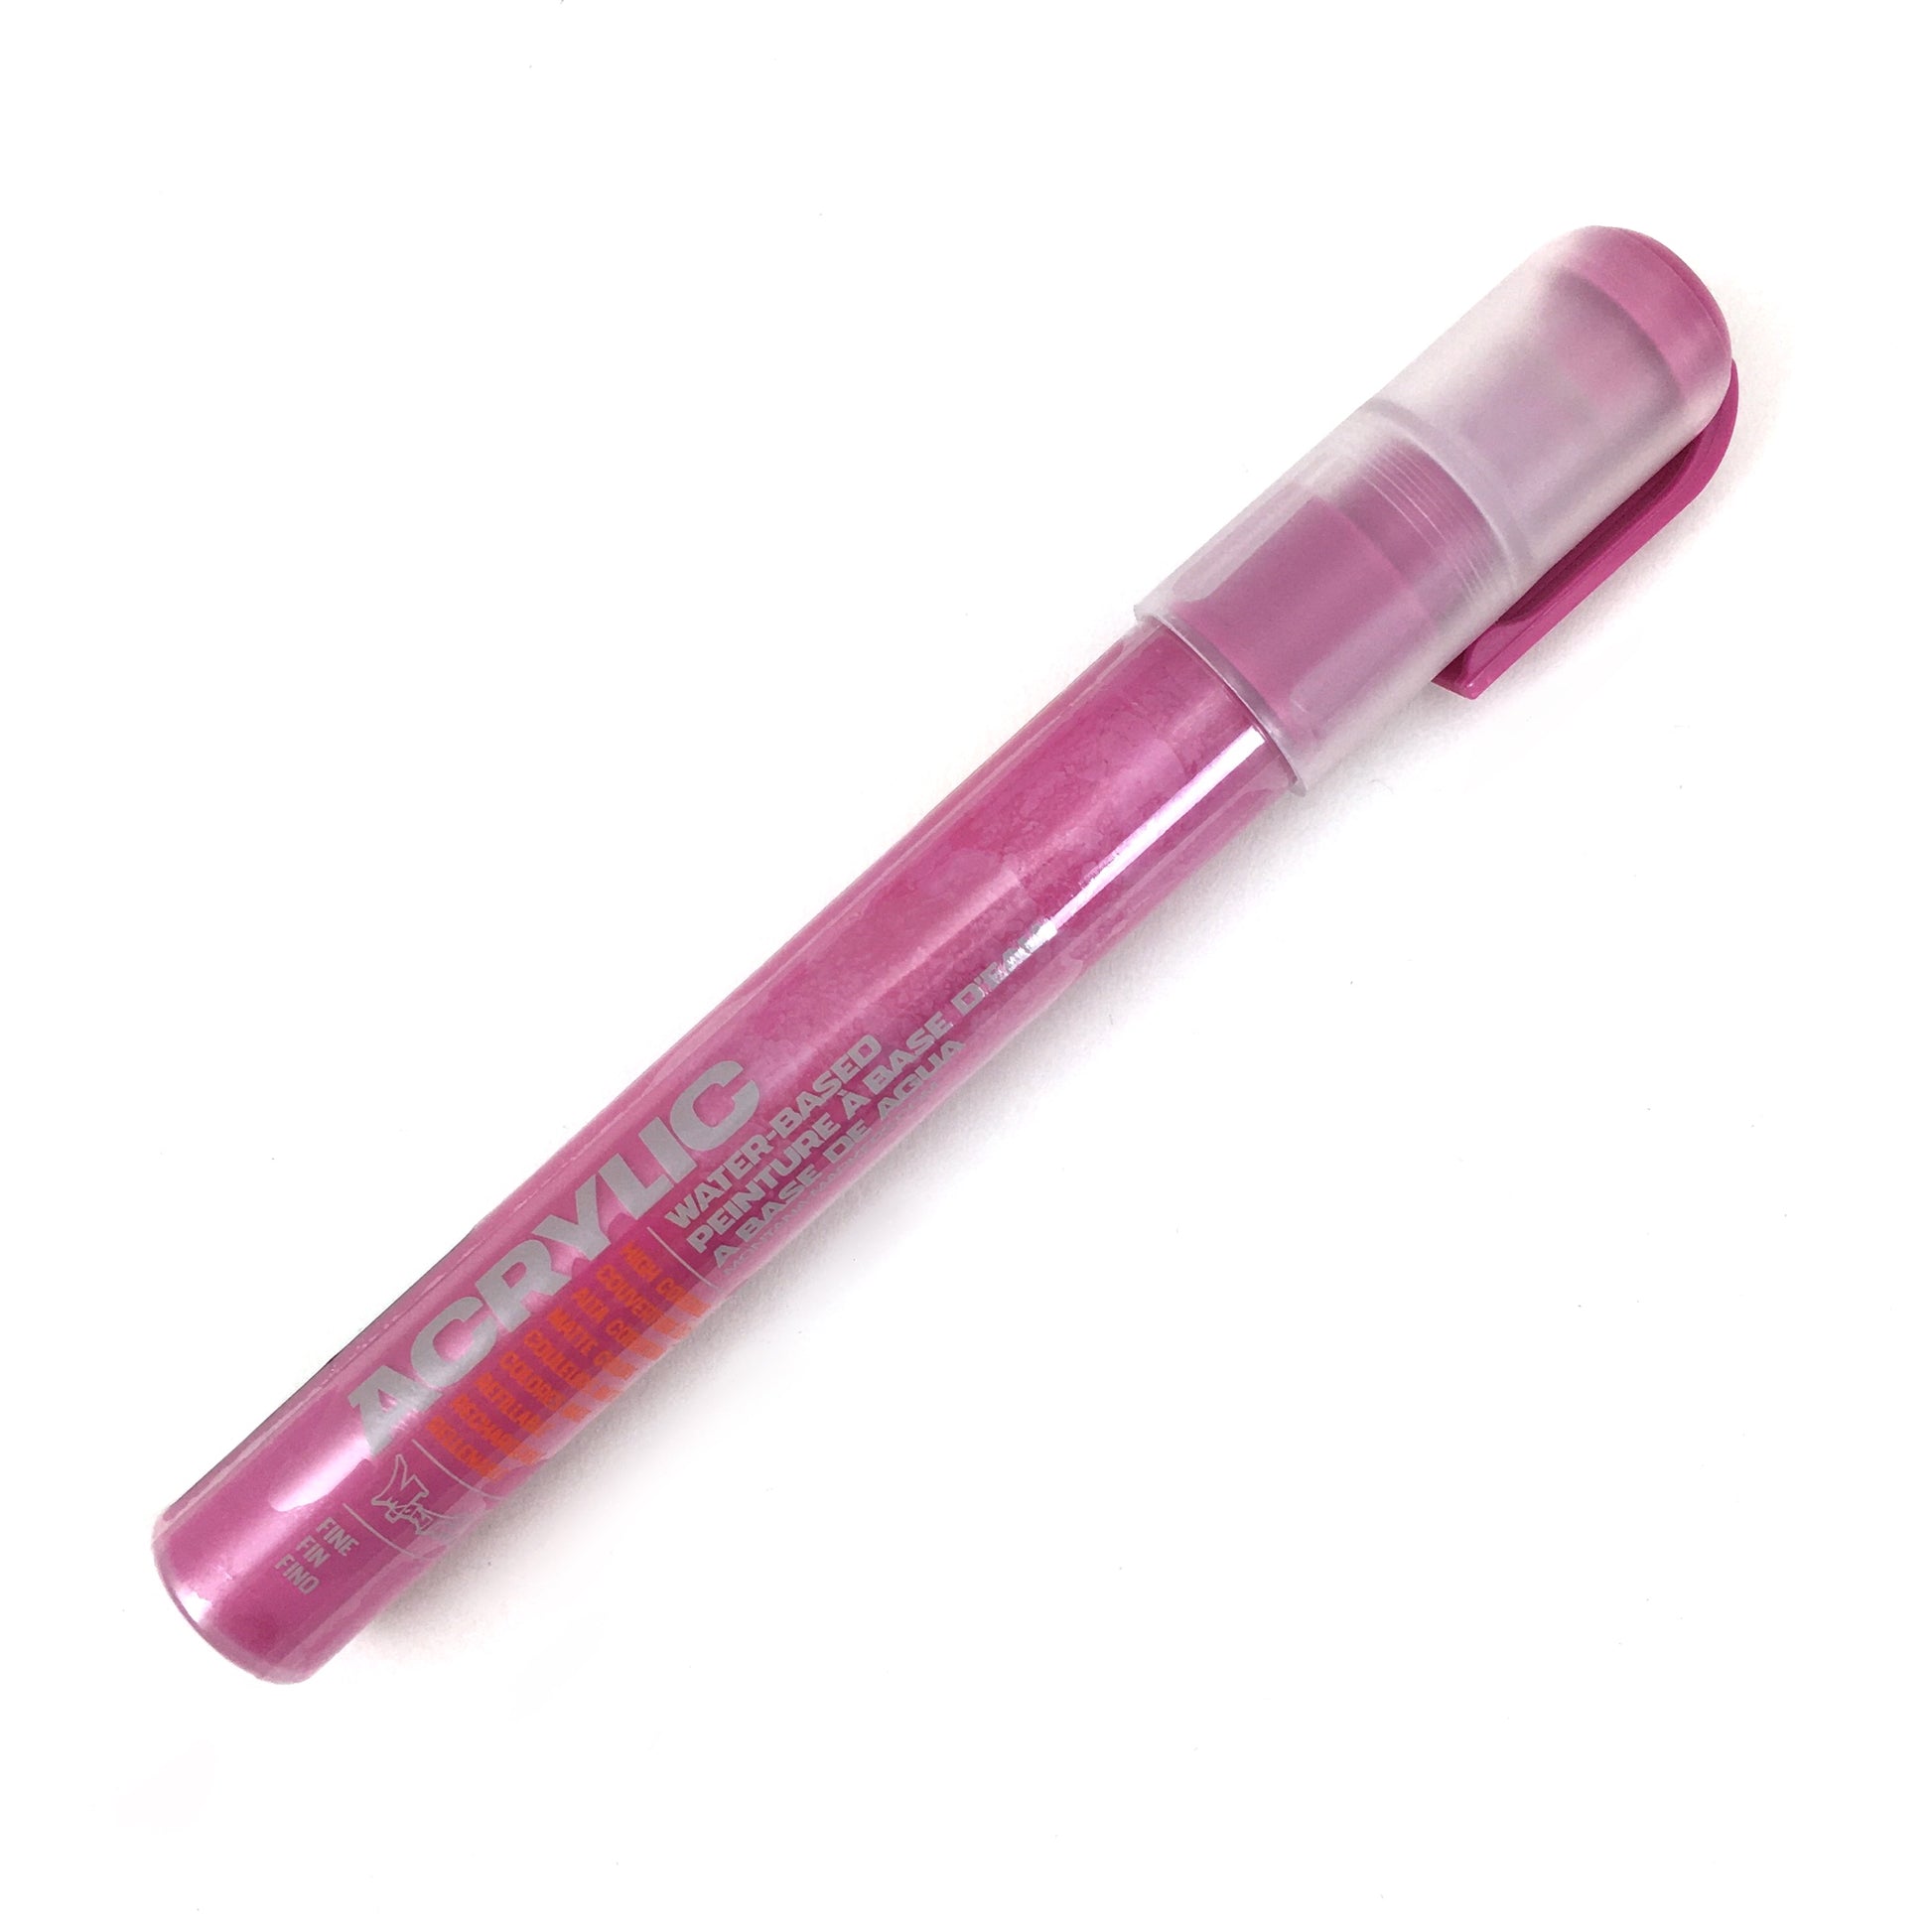 Montana Acrylic Paint Markers - Individuals - Shock Pink / 2 mm by Montana - K. A. Artist Shop